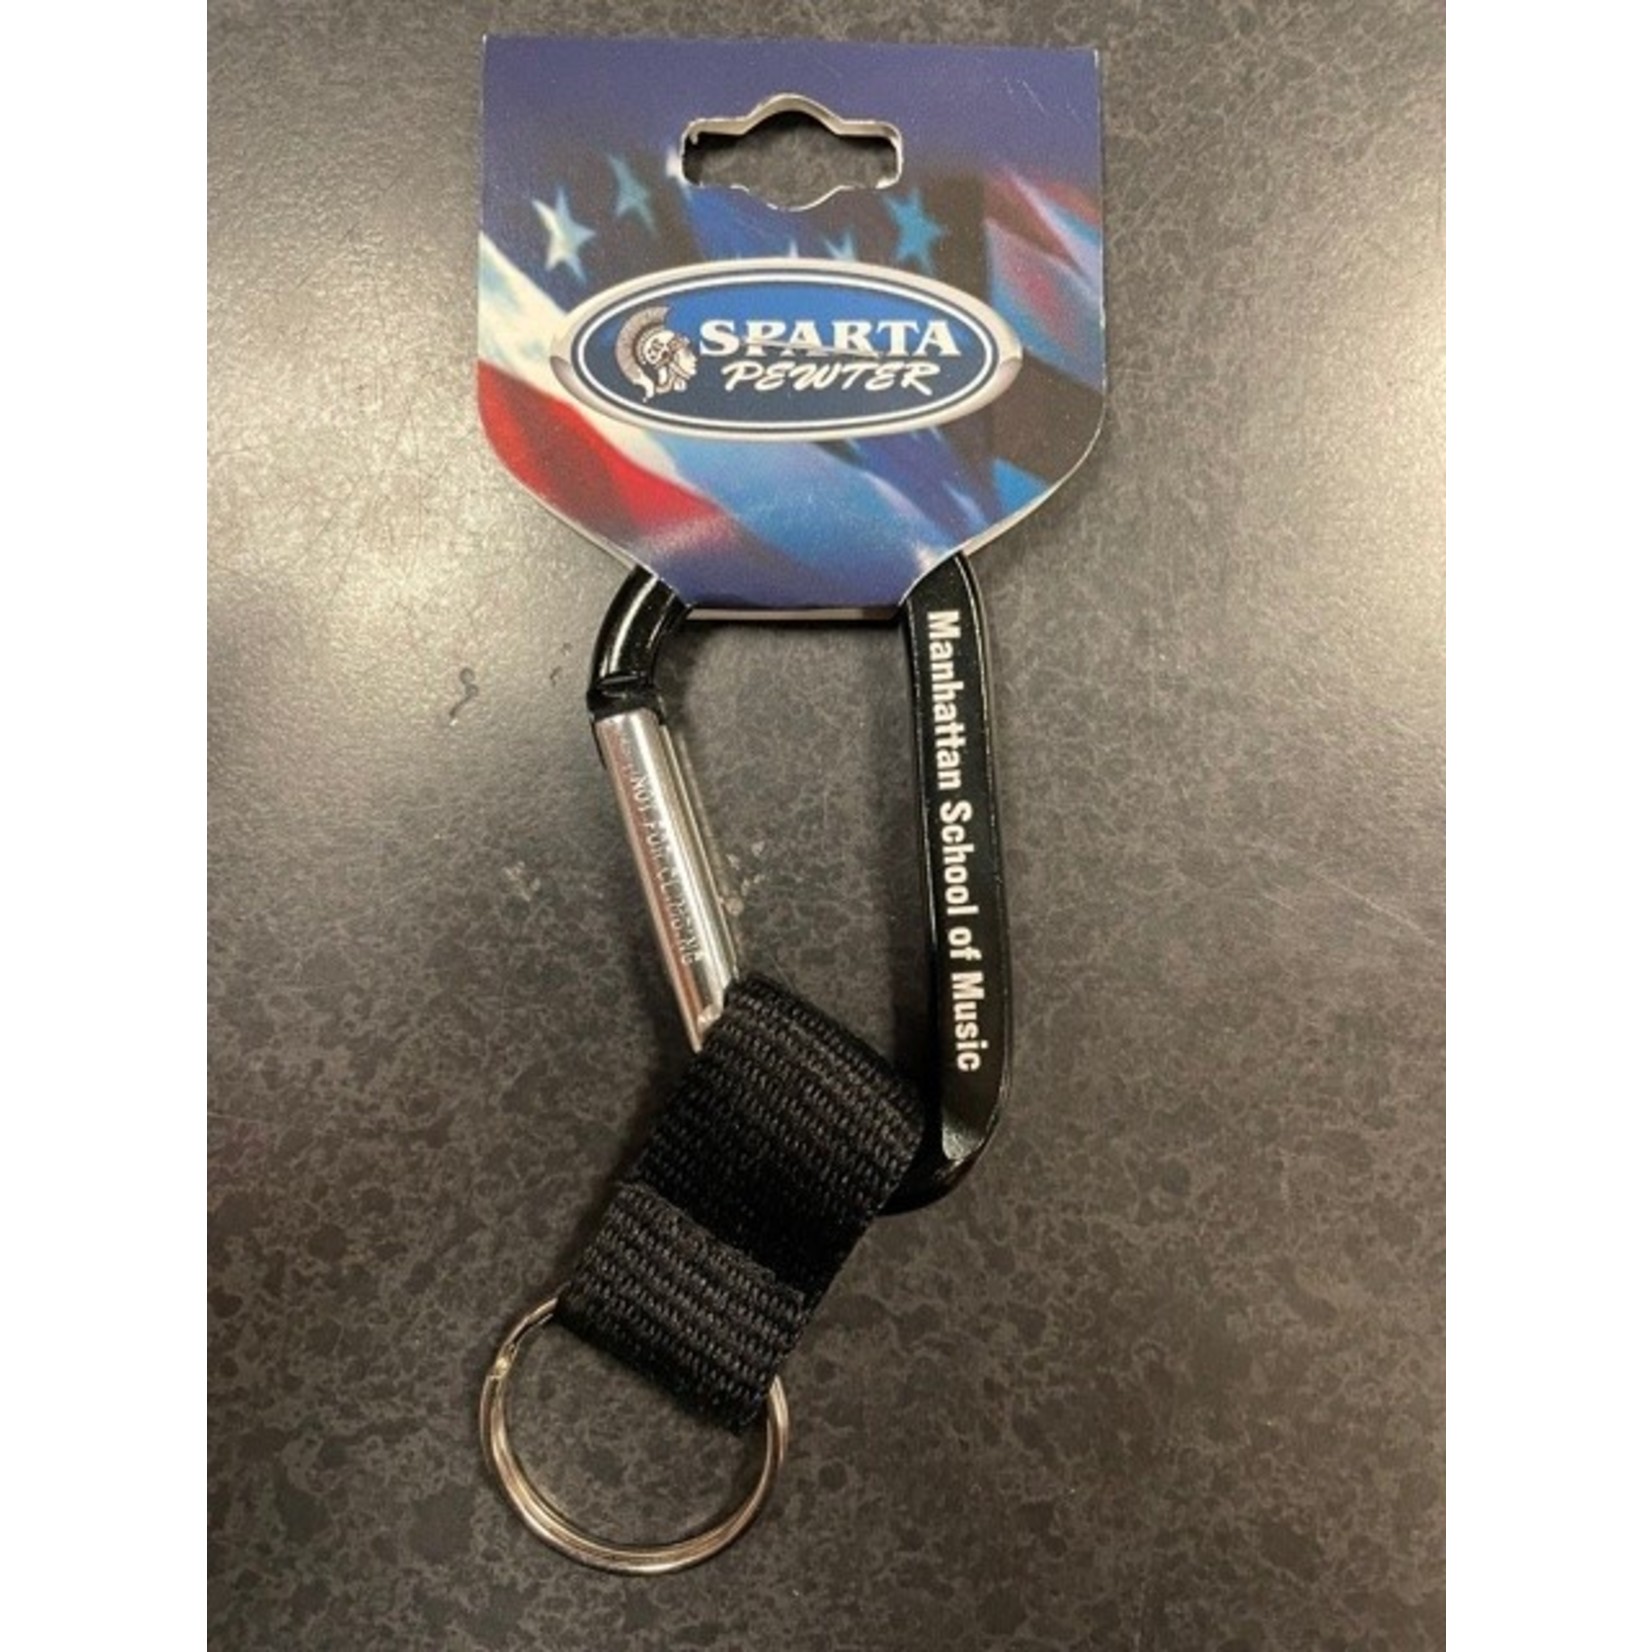 Small MSM Carabiner (red or black)